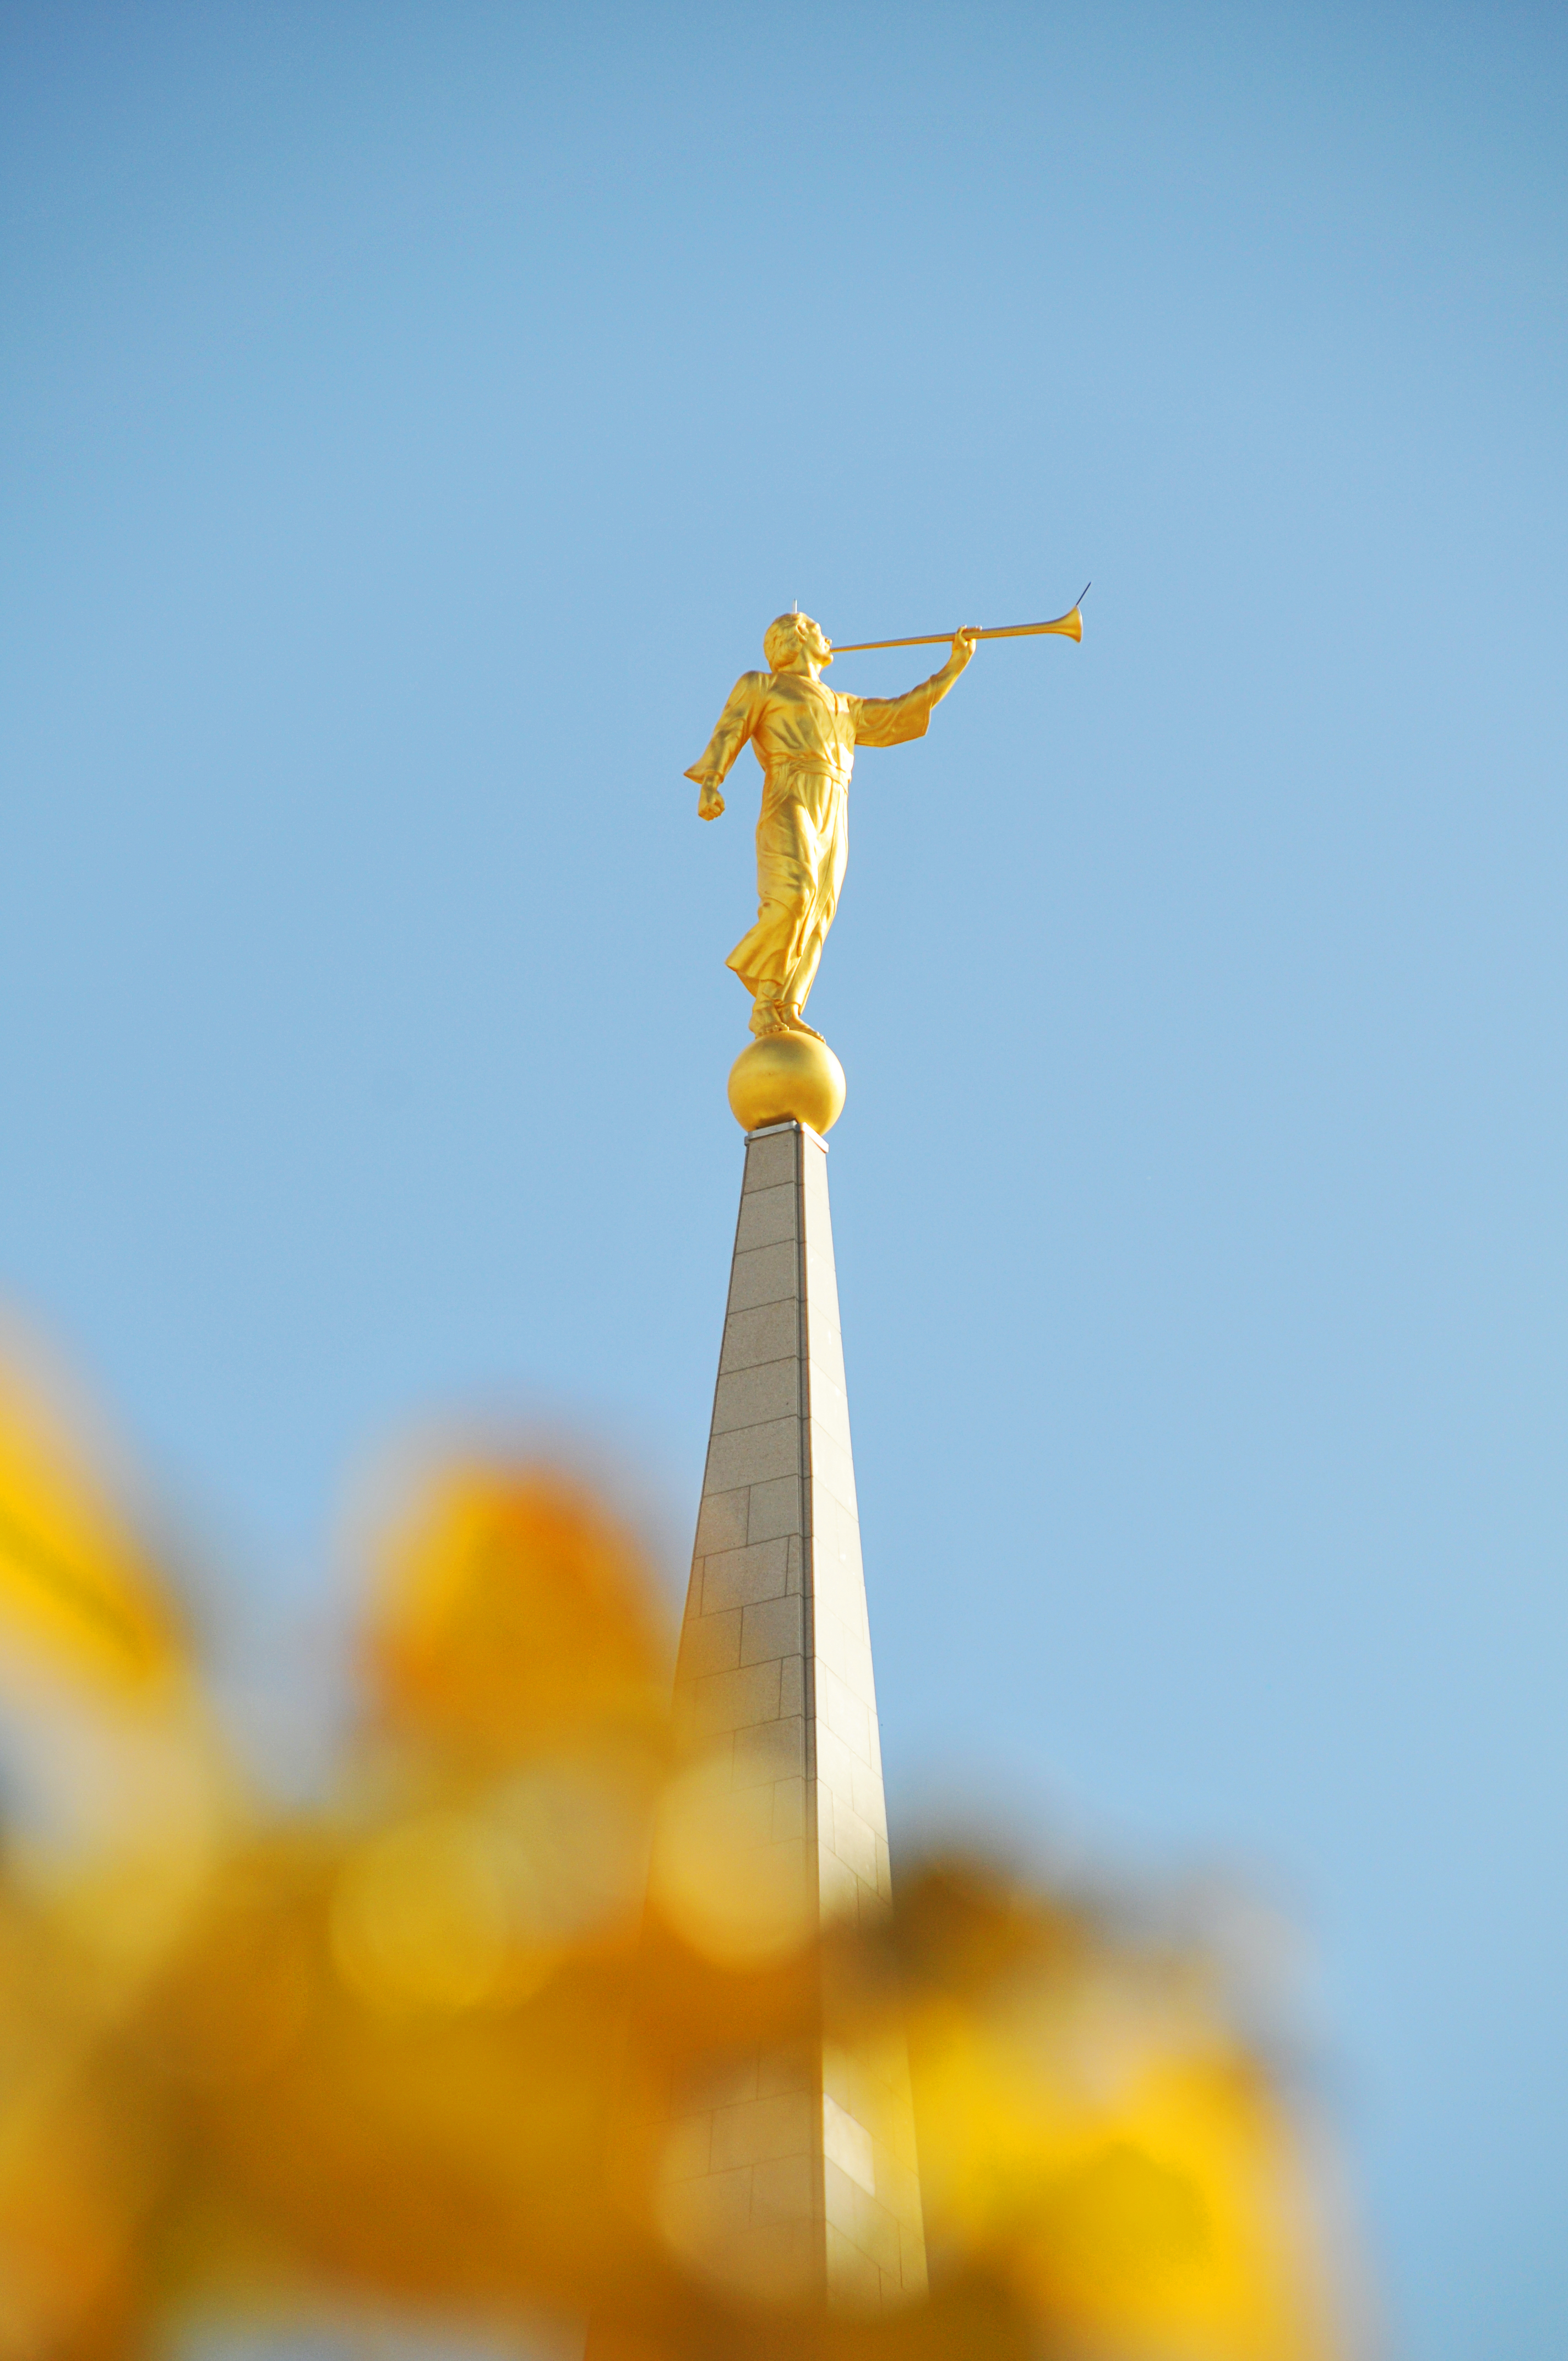 A shot of the Angel Moroni statue atop the Spire of The Oquirrh Mountain Utah Temple.